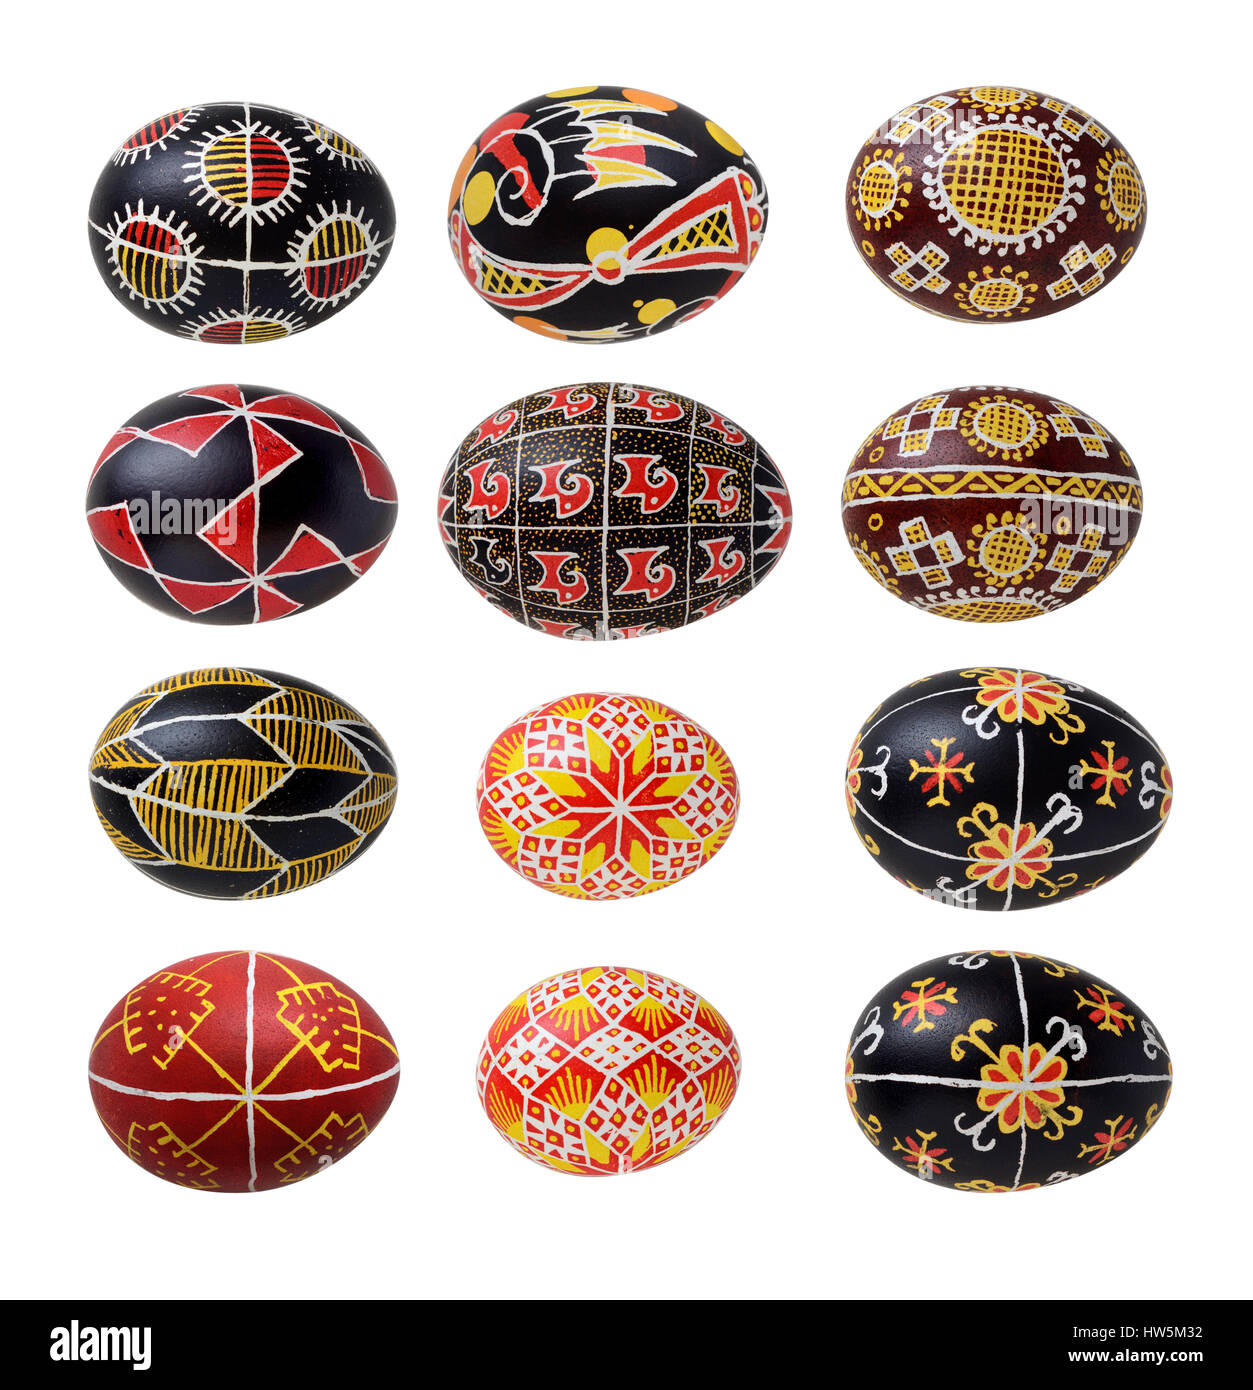 There are pysankas with traditional Ukrainian ornaments and symbols. The Easter eggs are decorated with a pattern using a wax-resist method. Stock Photo